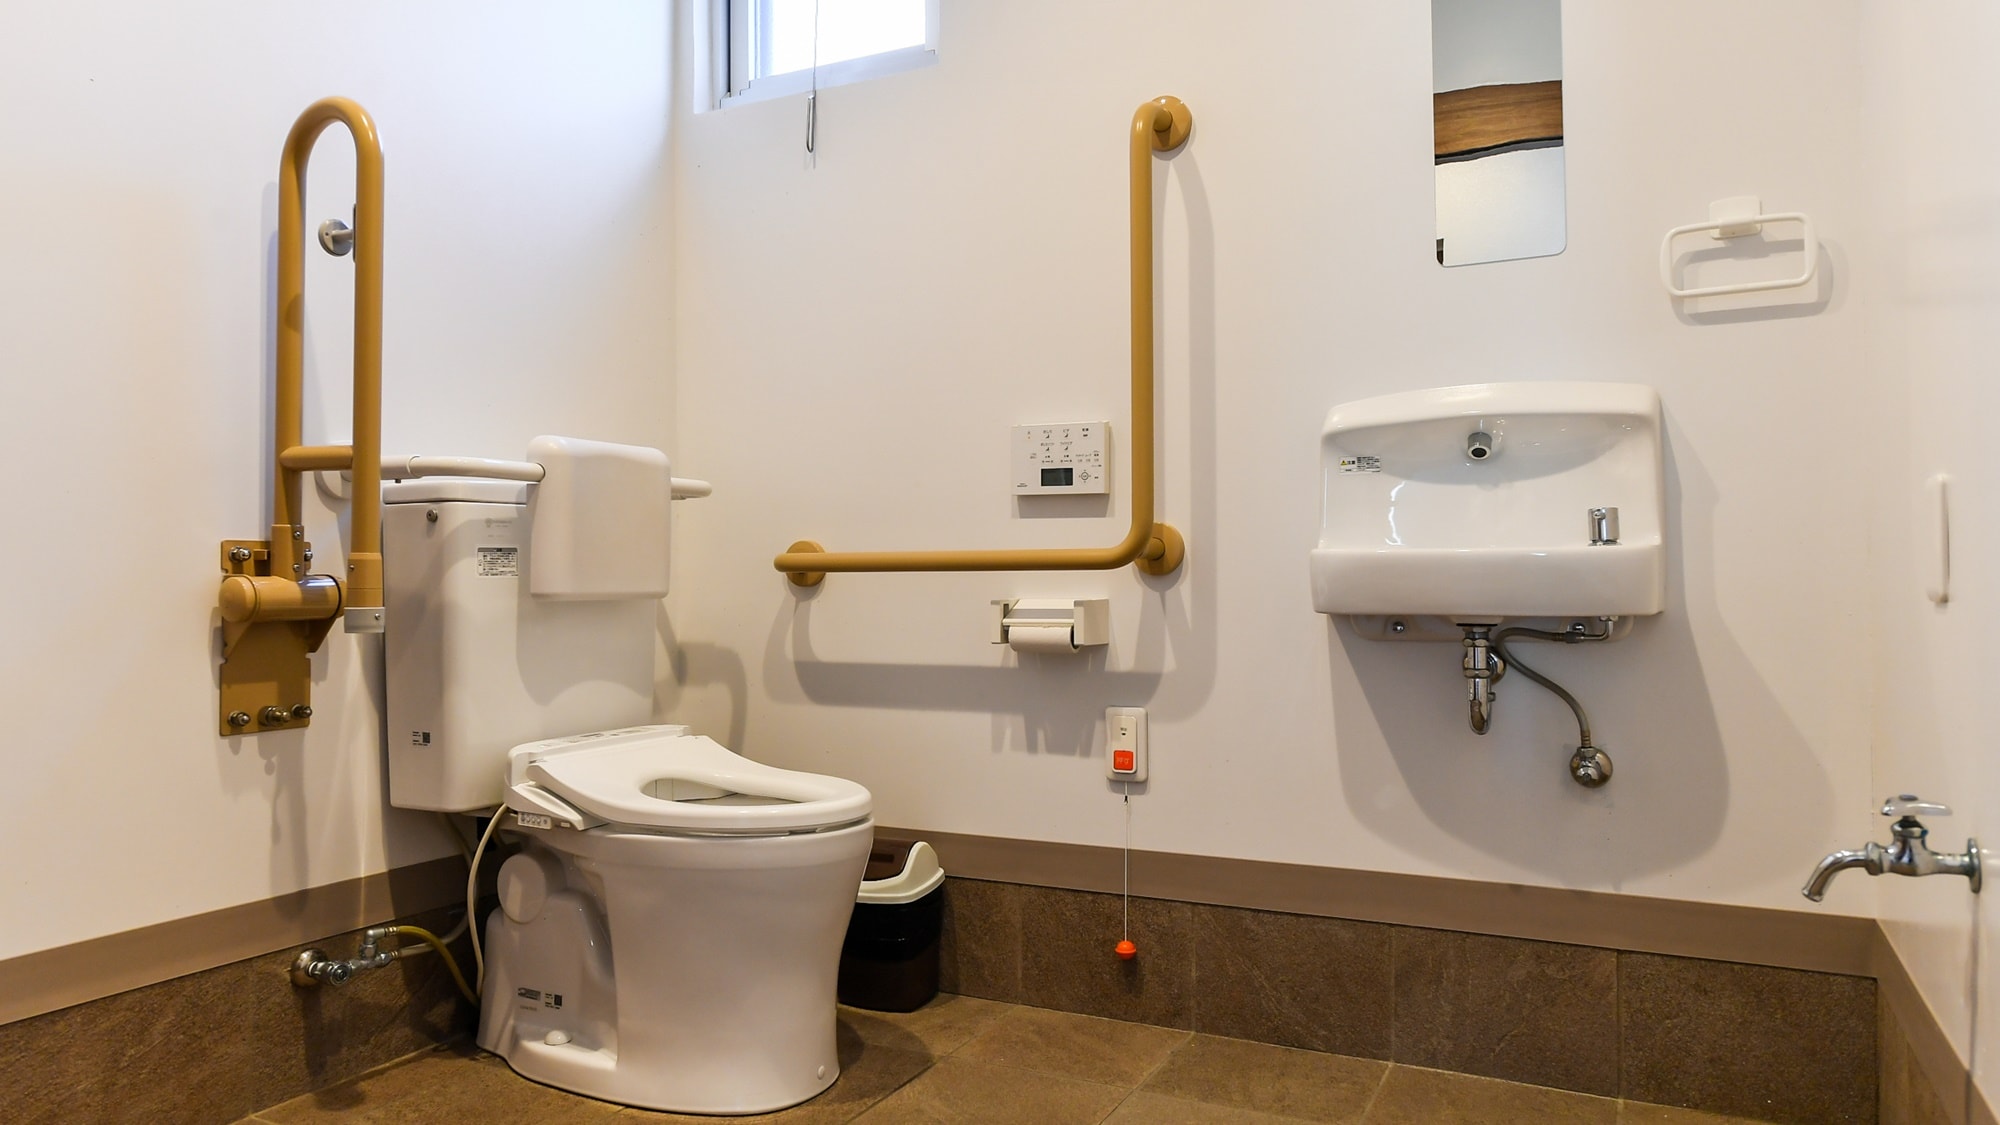 [Other facilities in the building] Universal toilet